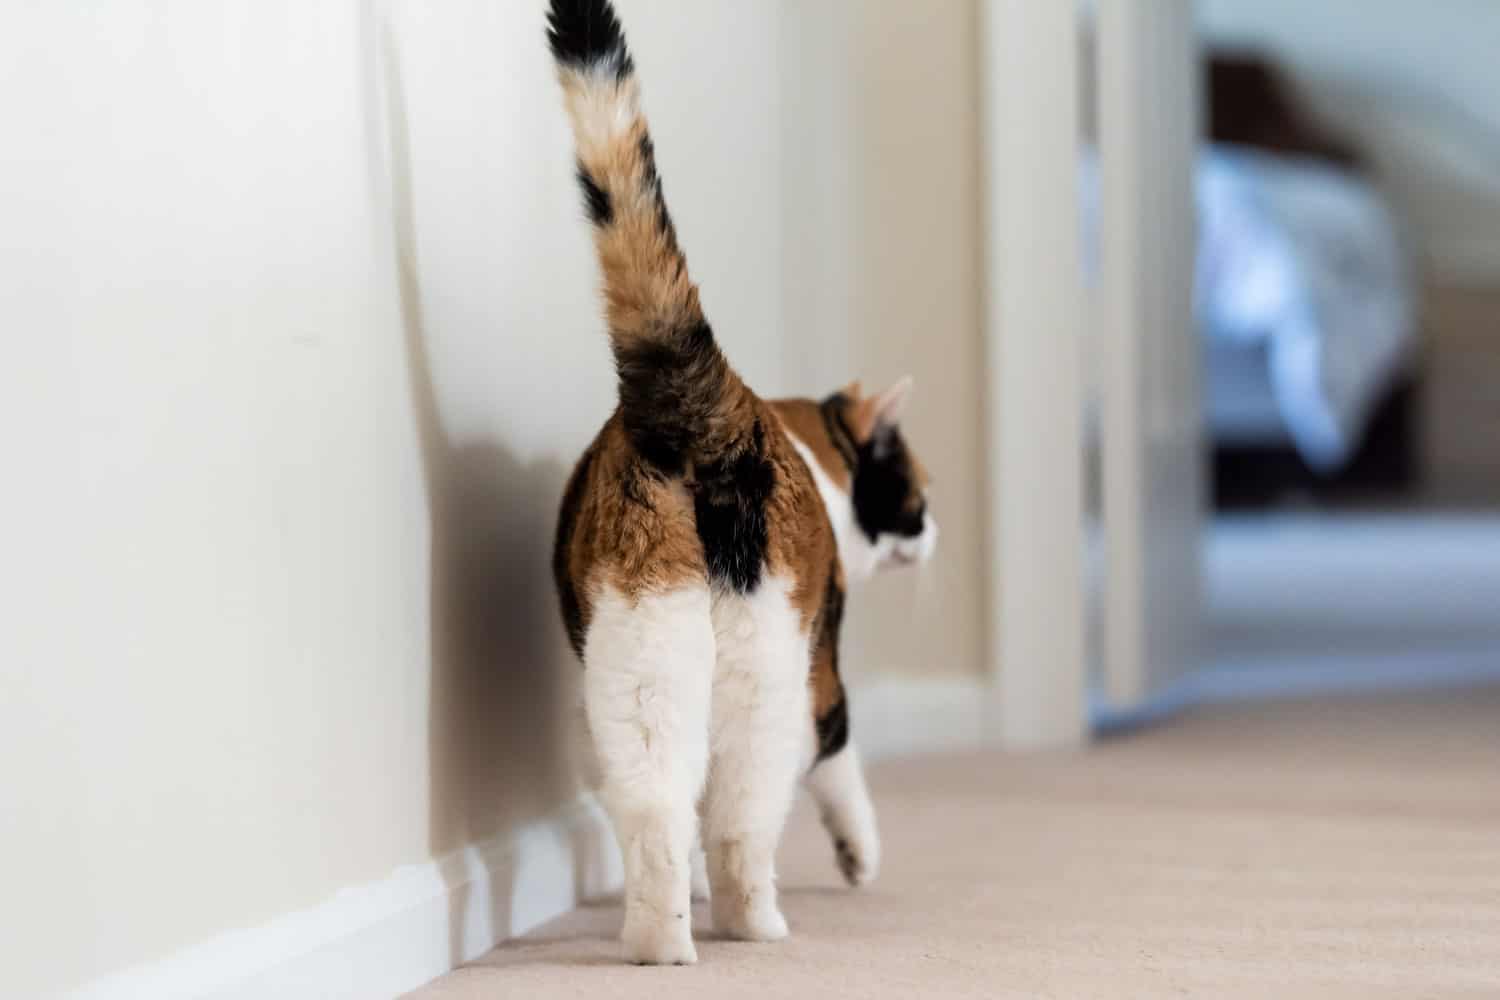 A cute Calico cat walking on the house hallway